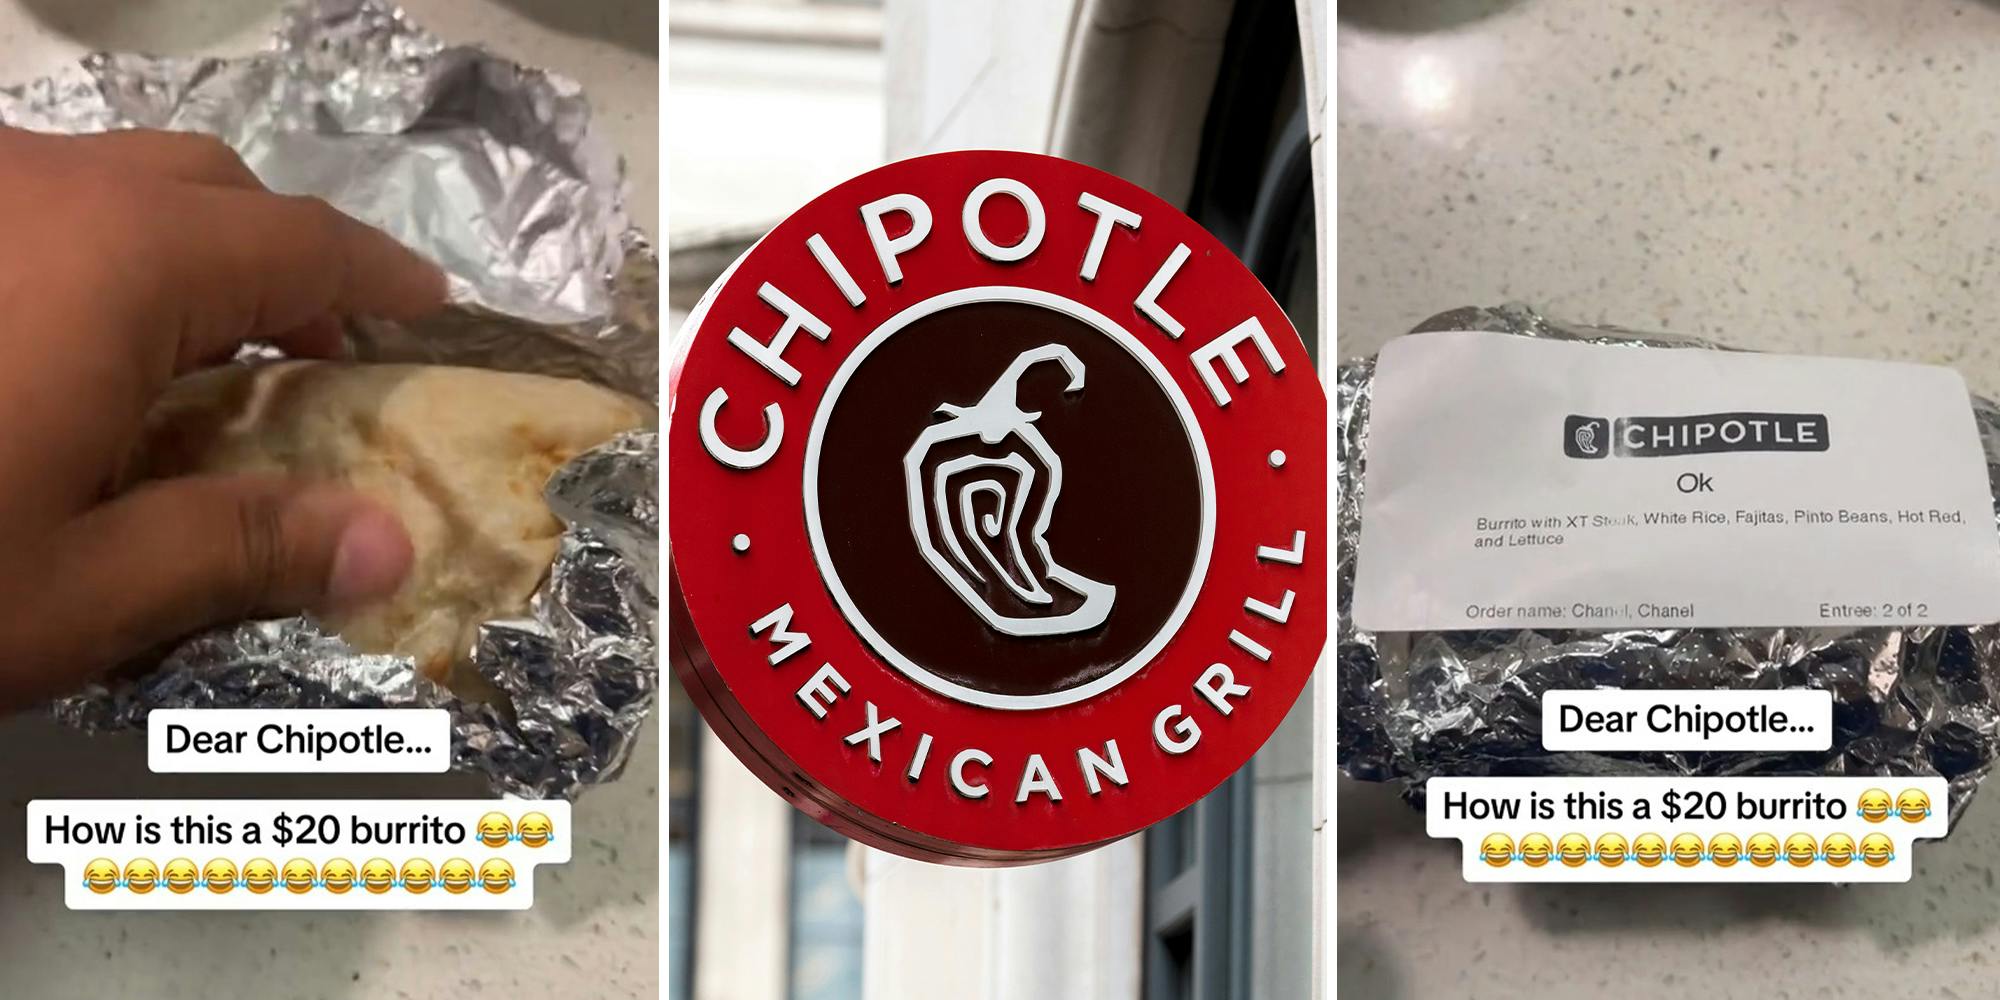 Chipotle customer orders double meat steak burrito. He can’t believe what he received